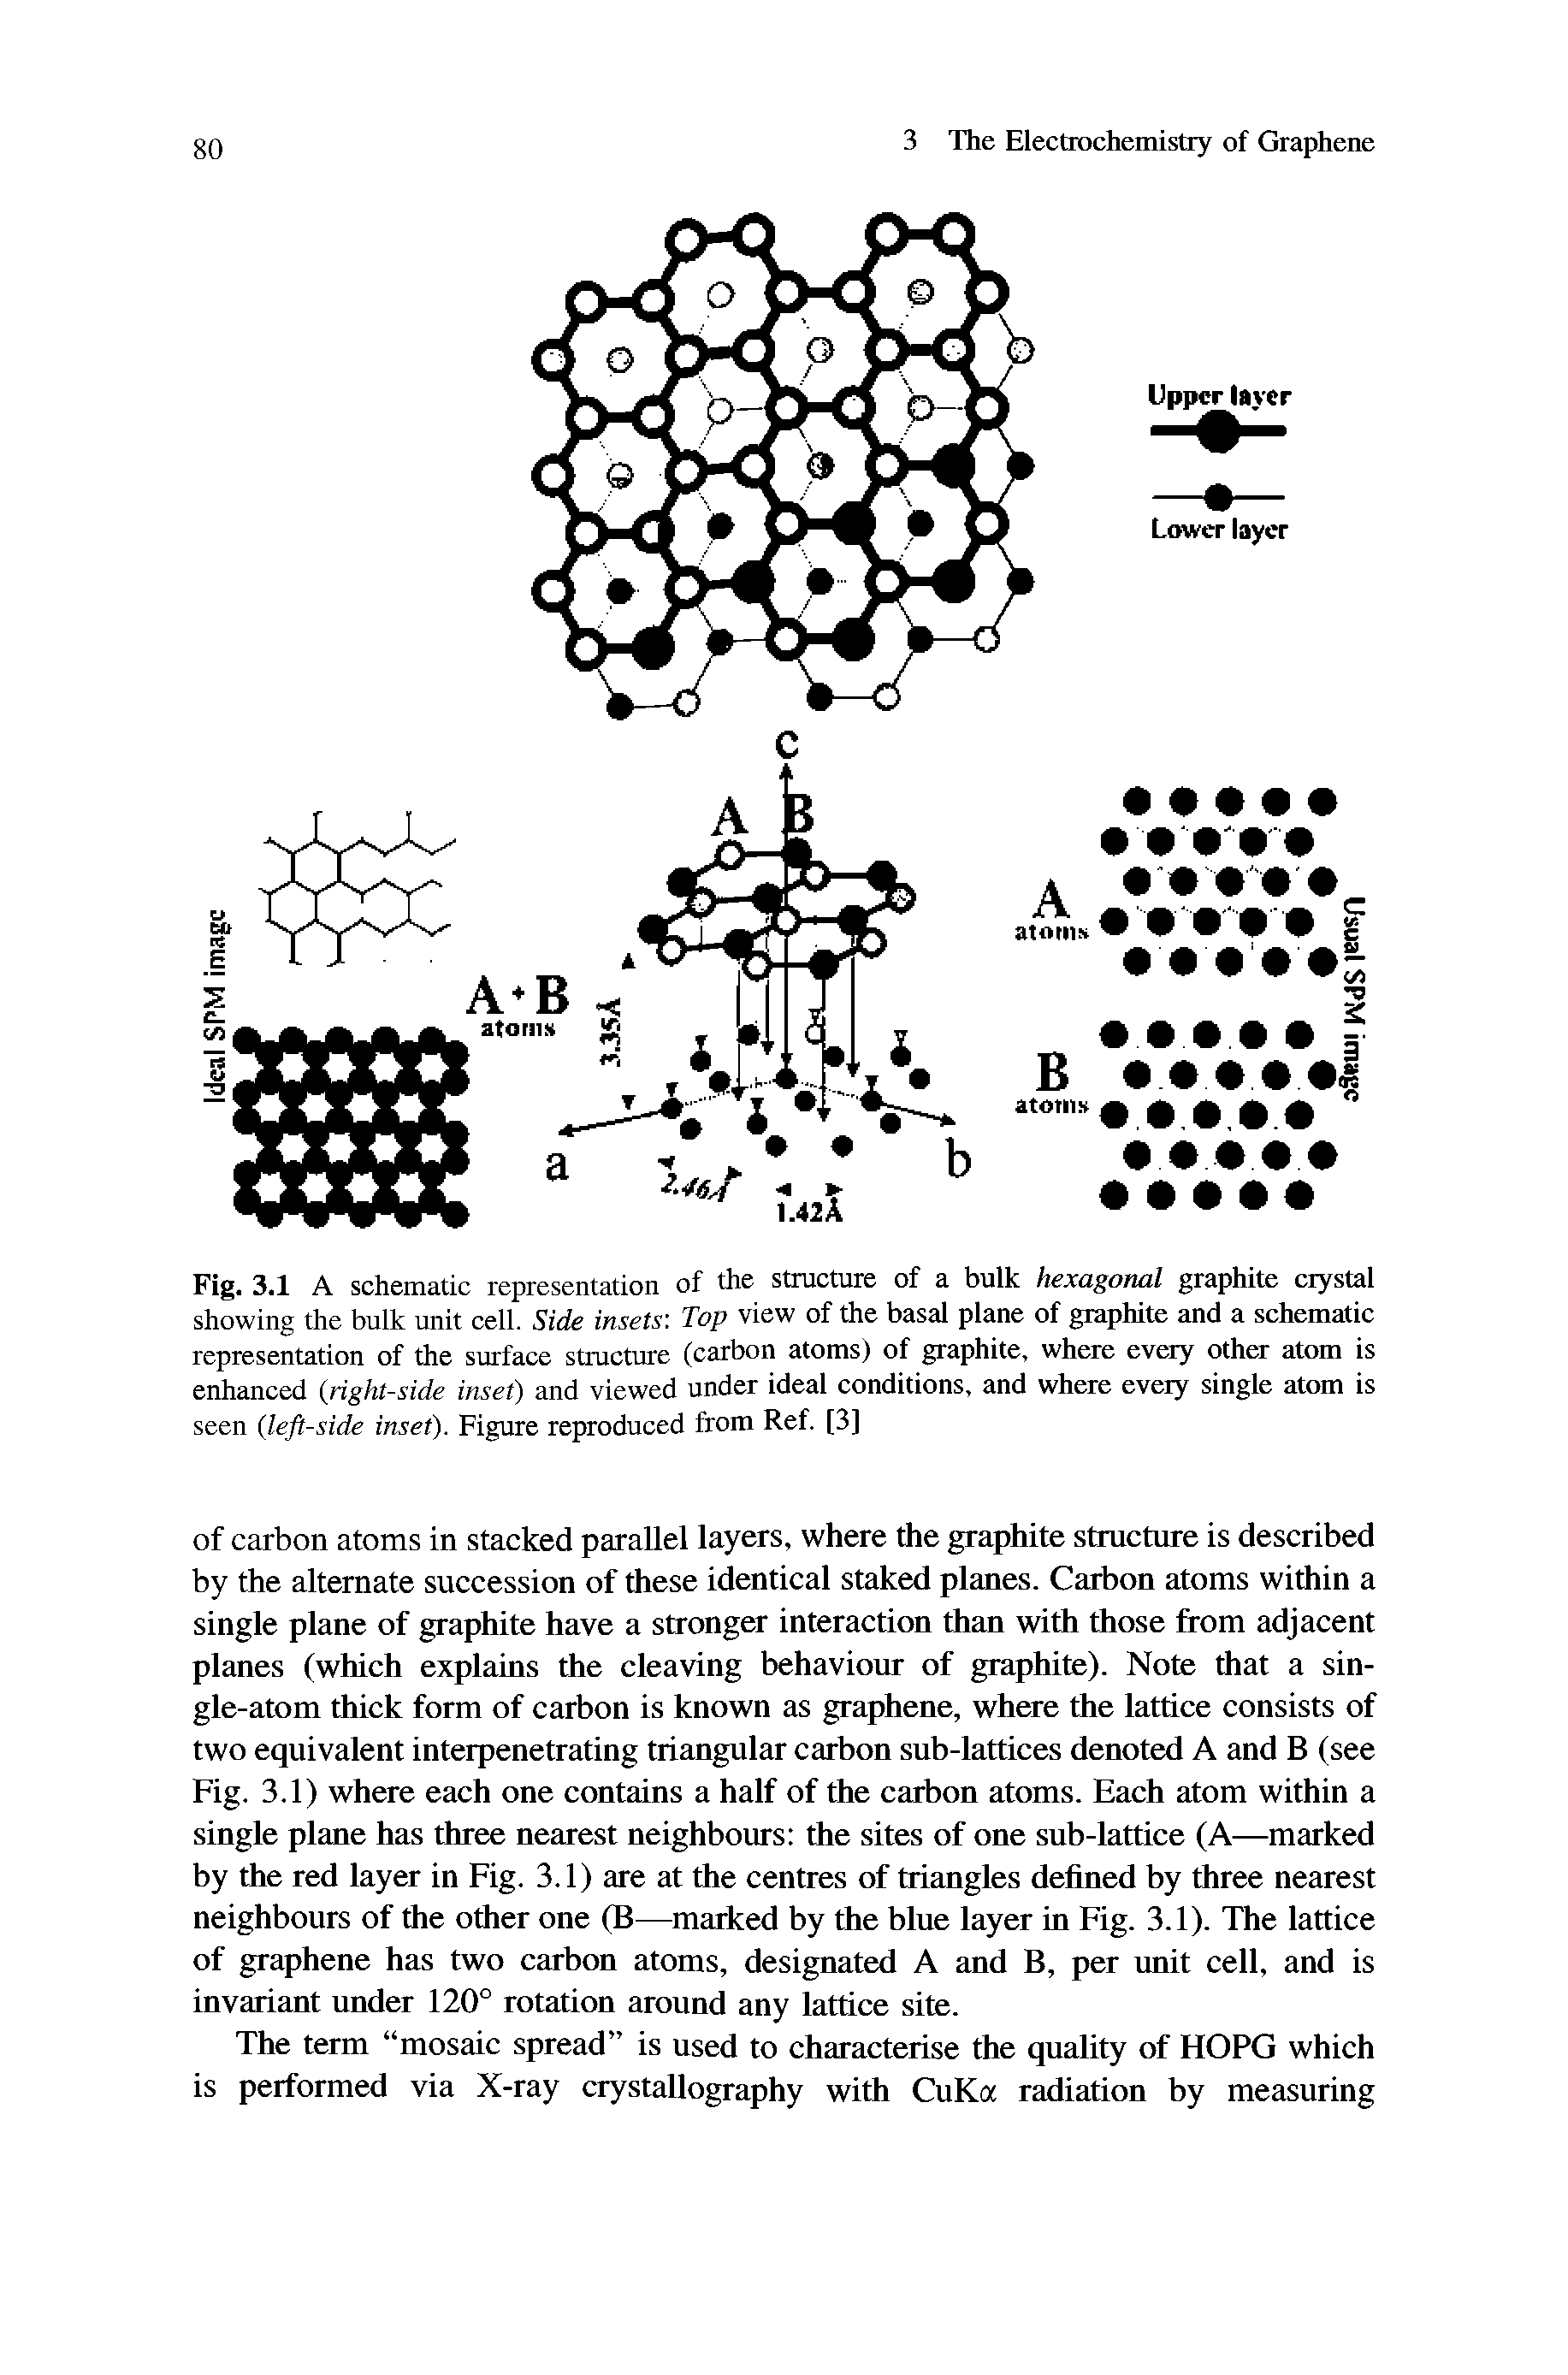 Fig. 3.1 A schematic representation of the structure of a bulk hexagonal graphite crystal showing the bulk unit cell. Side insets. Top view of the basal plane of graphite and a schematic representation of the surface structure (carbon atoms) of graphite, where every other atom is enhanced (right-side inset) and viewed under ideal conditions, and where every single atom is seen (left-side inset). Figure reproduced from Ref. [3]...